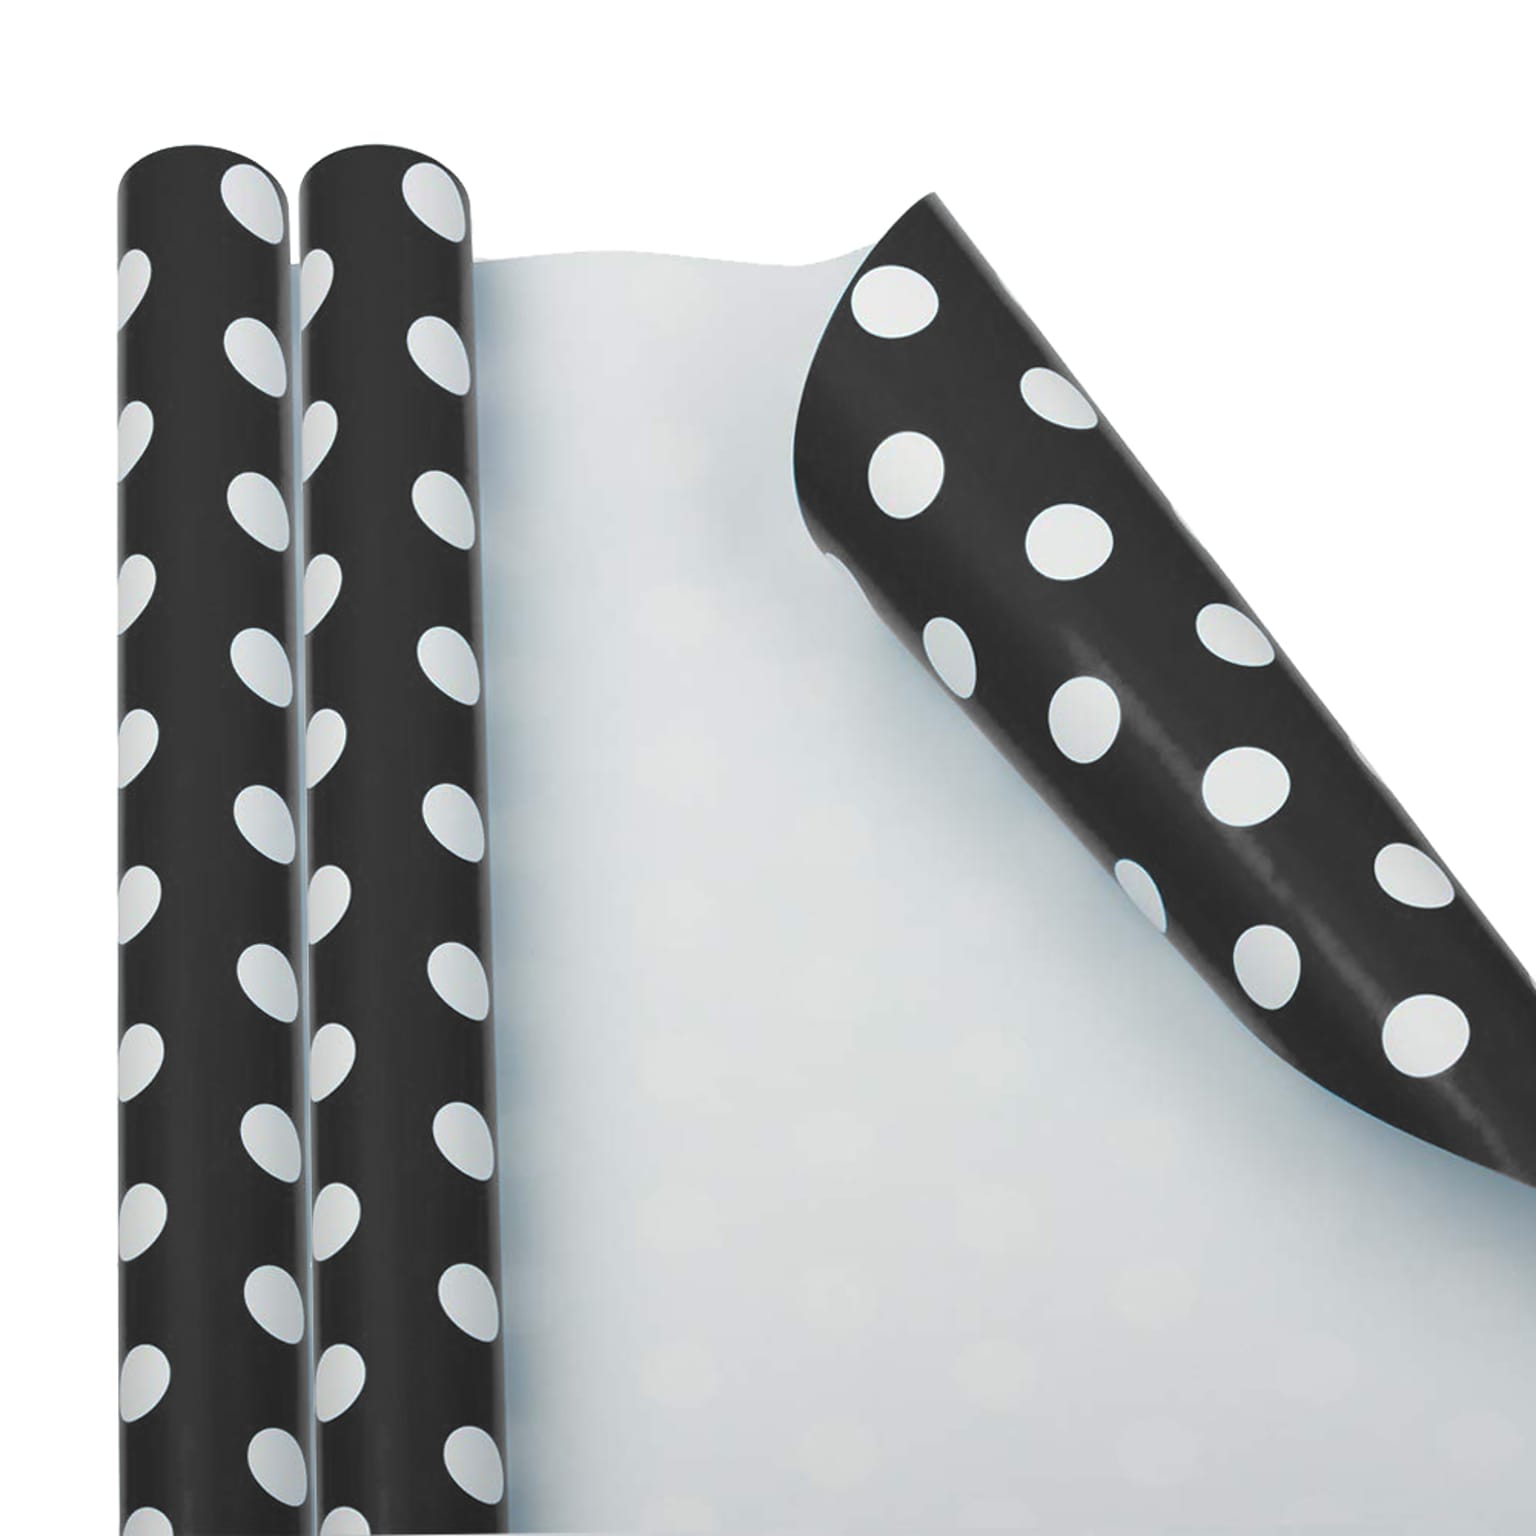 JAM PAPER Gift Wrap, Polka Dot Wrapping Paper, 25 Sq Ft per Roll, Black with White Dots, 2/Pack